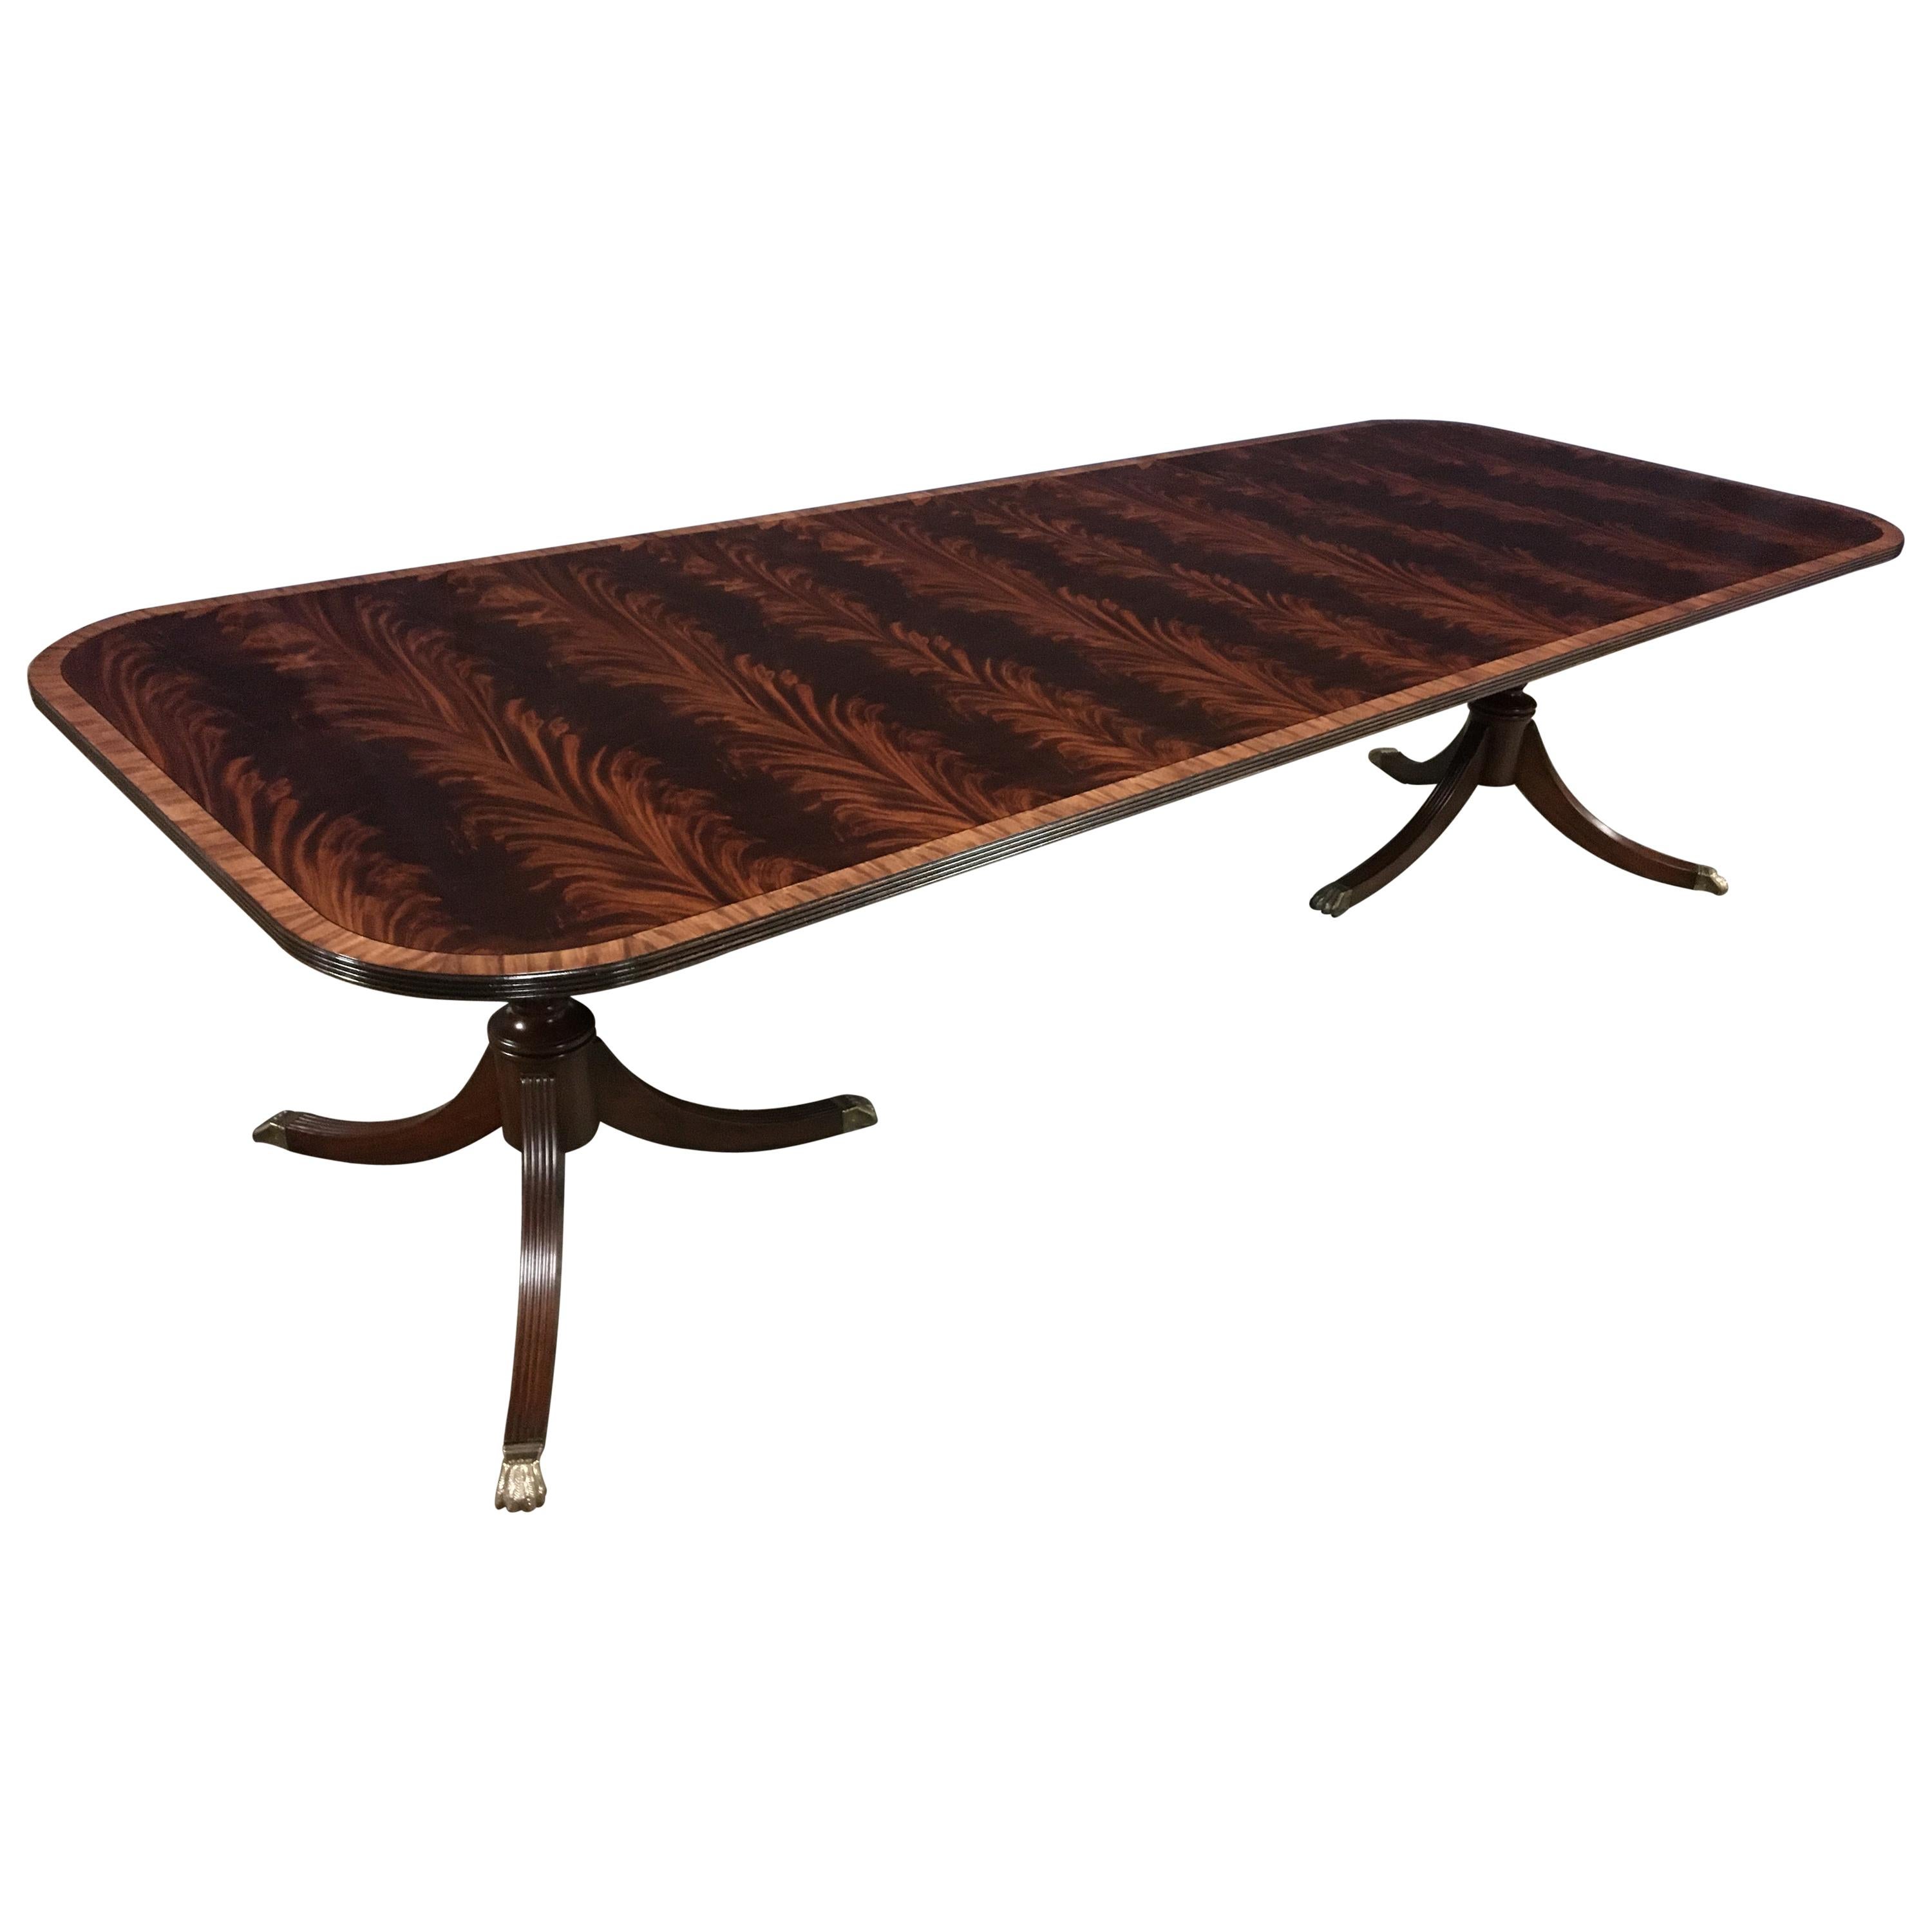 Banded Mahogany Georgian Style Dining Table by Leighton Hall